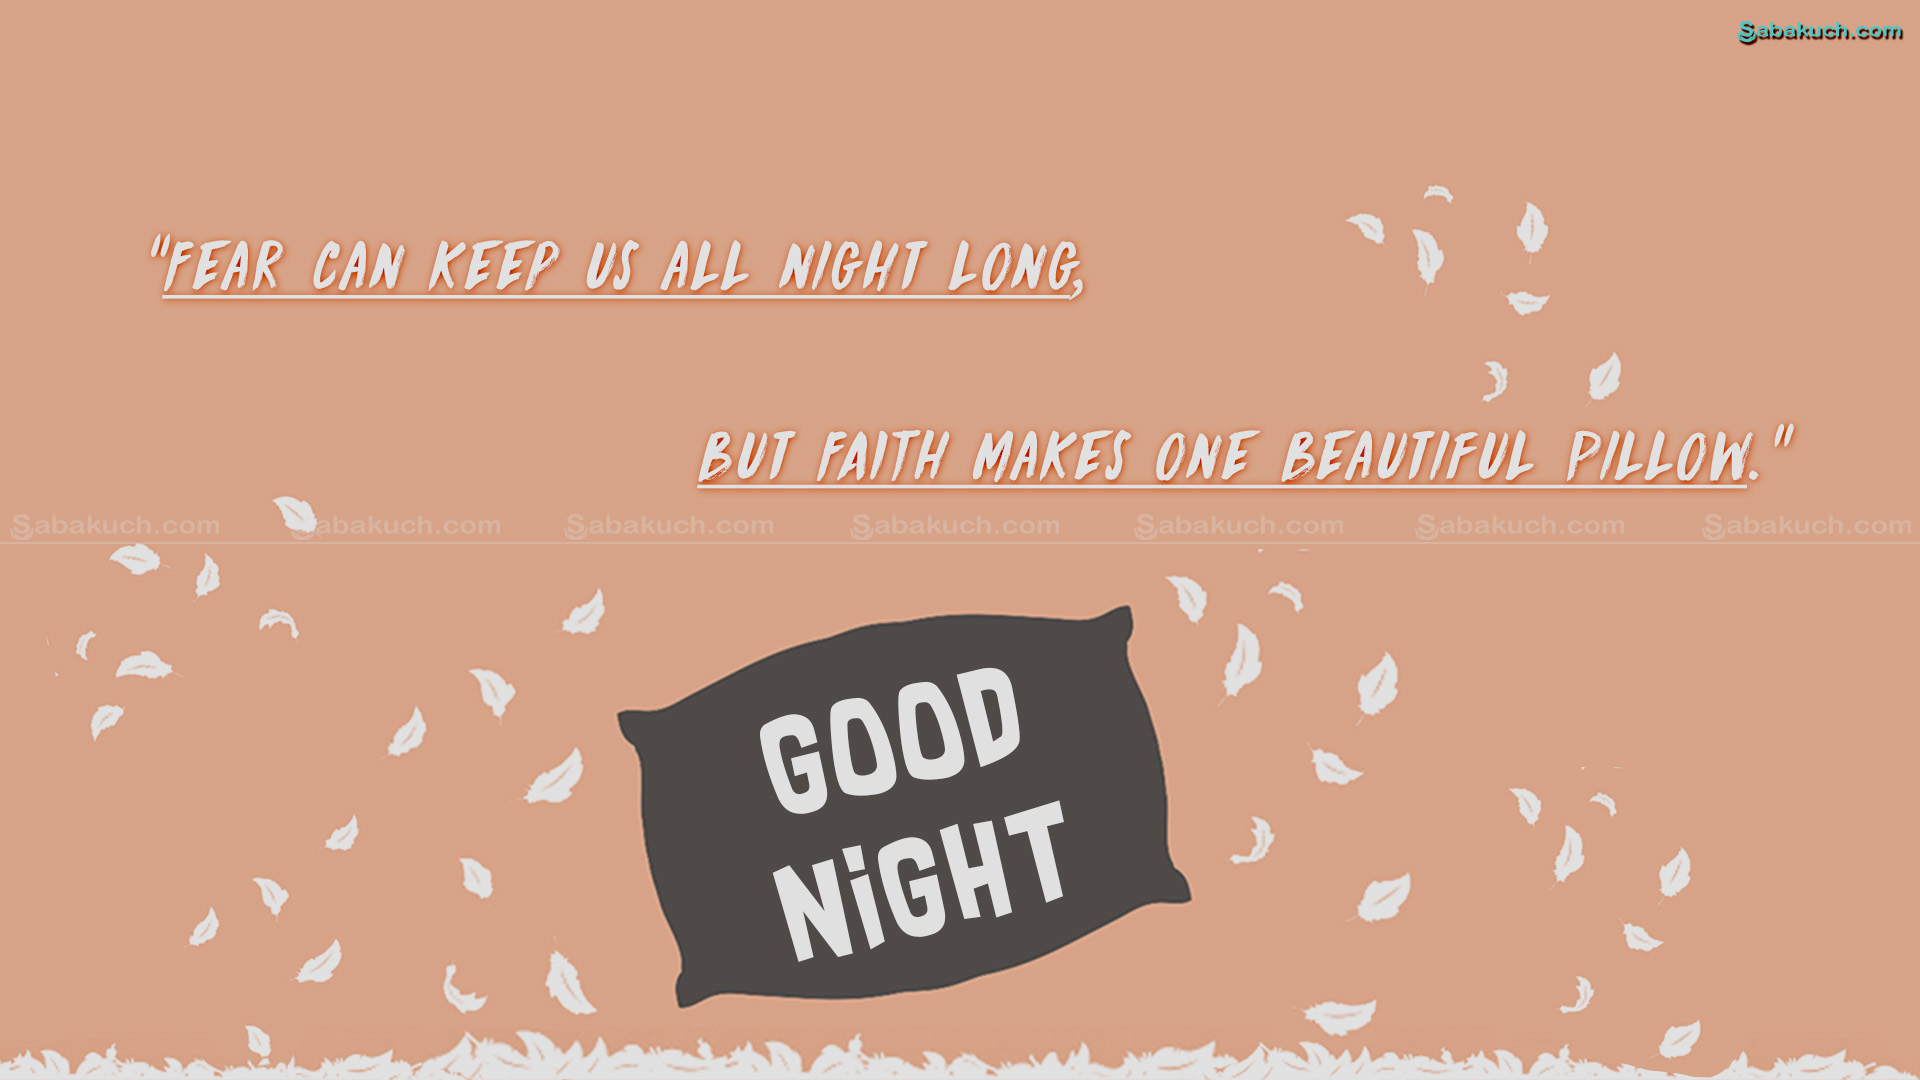 Sabakuch Blog Goodnight Wallpaper - Good Night Images All Types , HD Wallpaper & Backgrounds